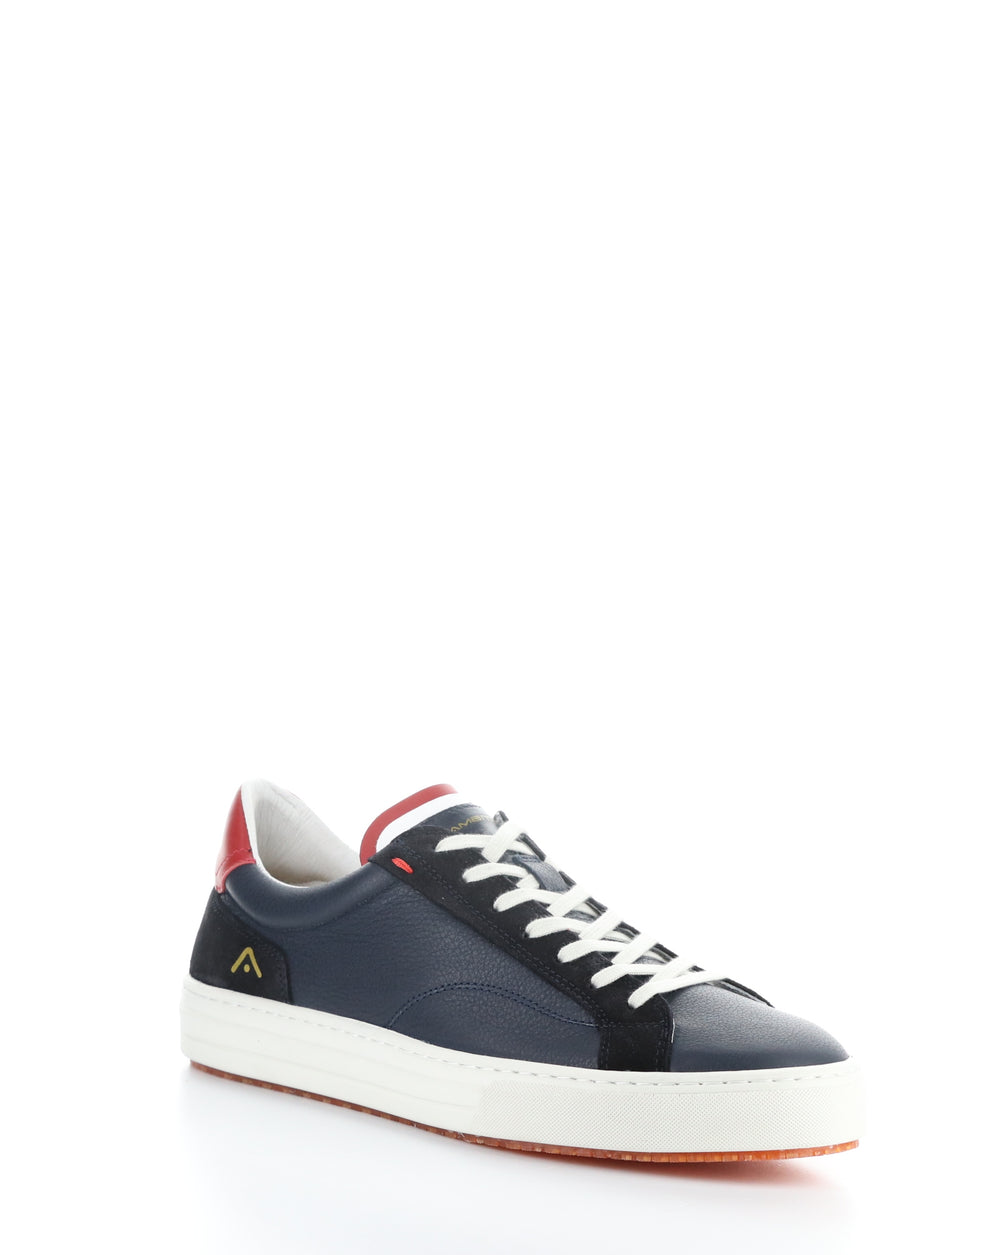 11218 NAVY/WHITE/RED Lace-up Shoes